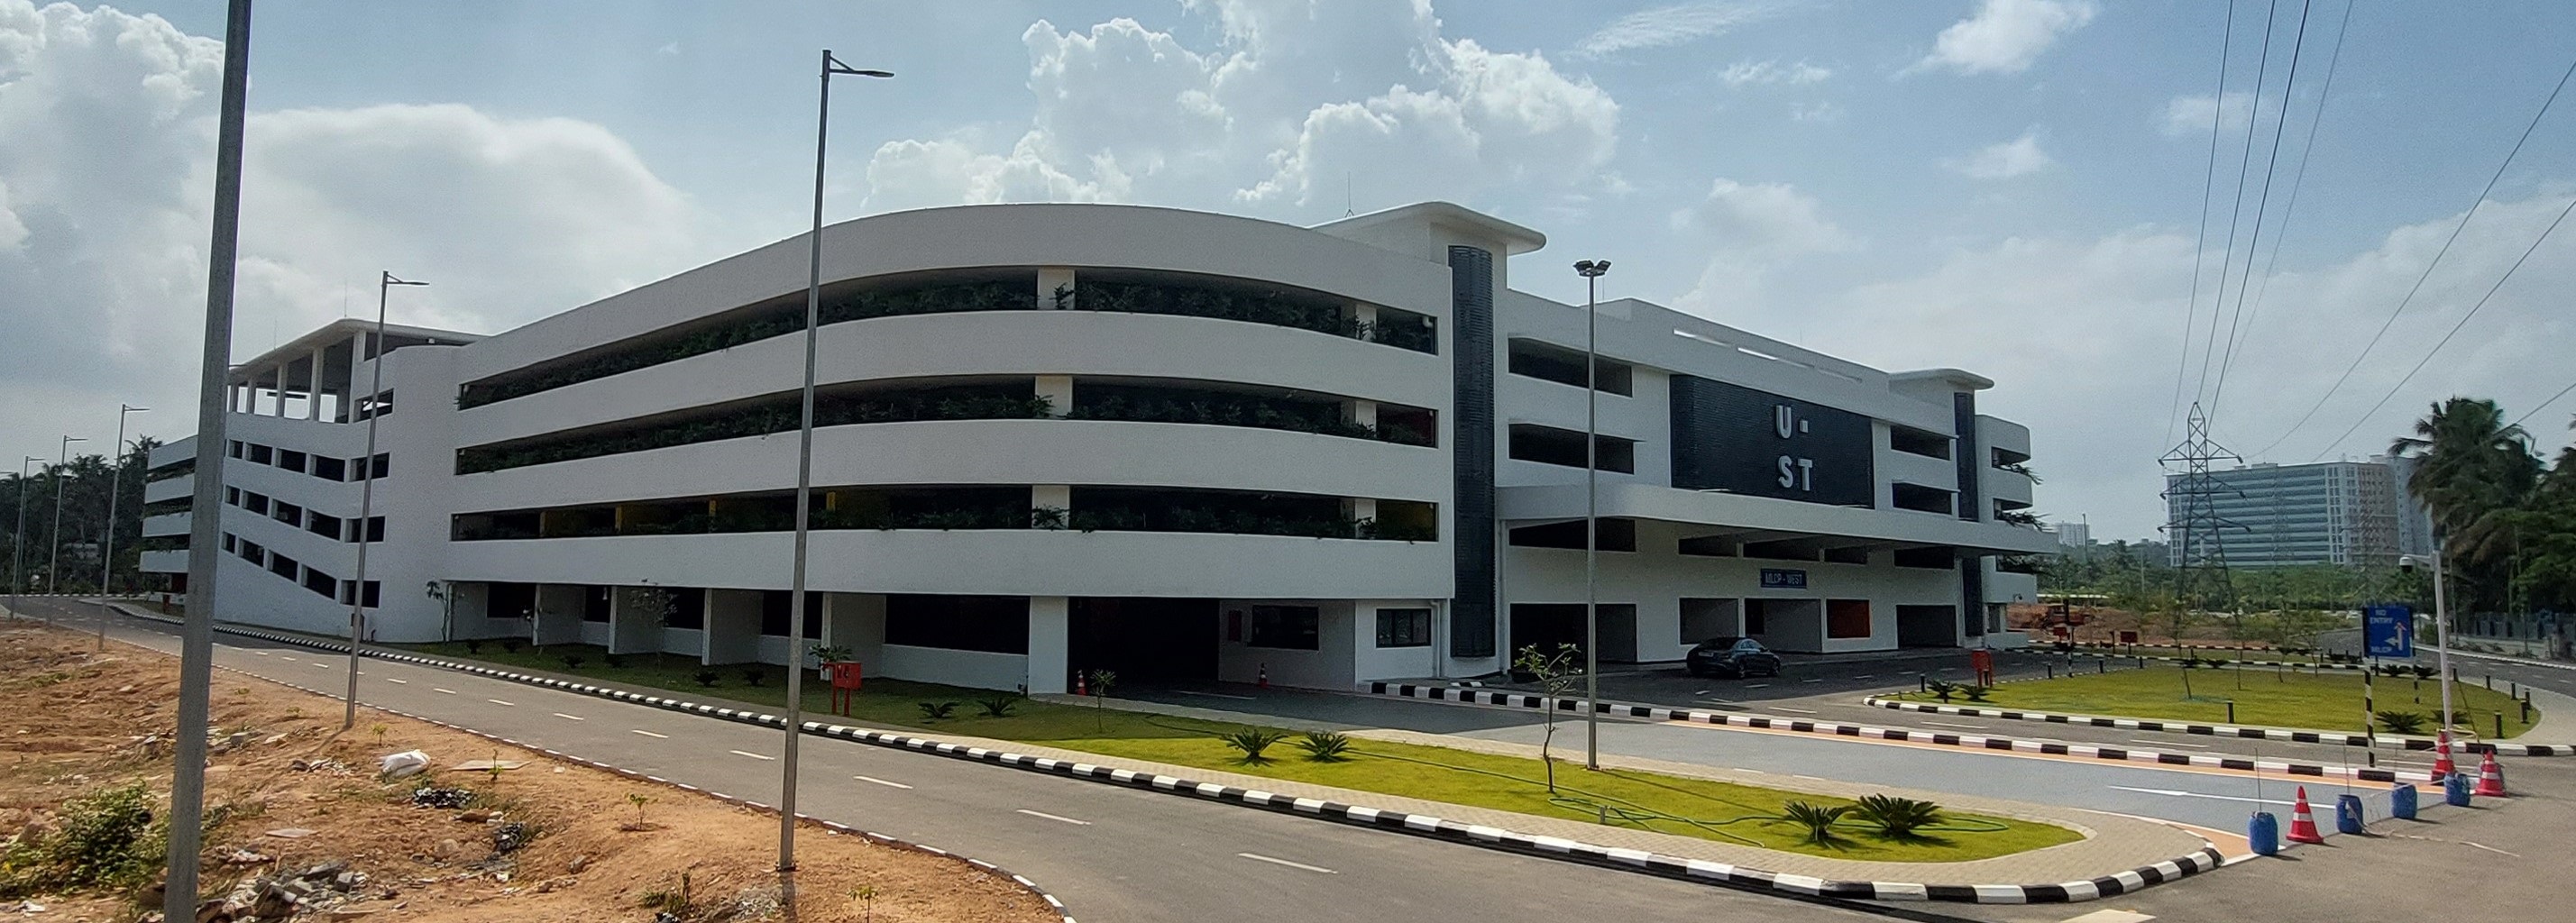 UST Thiruvananthapuram Campus Opens One of the Largest Multi-Level Car Parking Facilities in the City